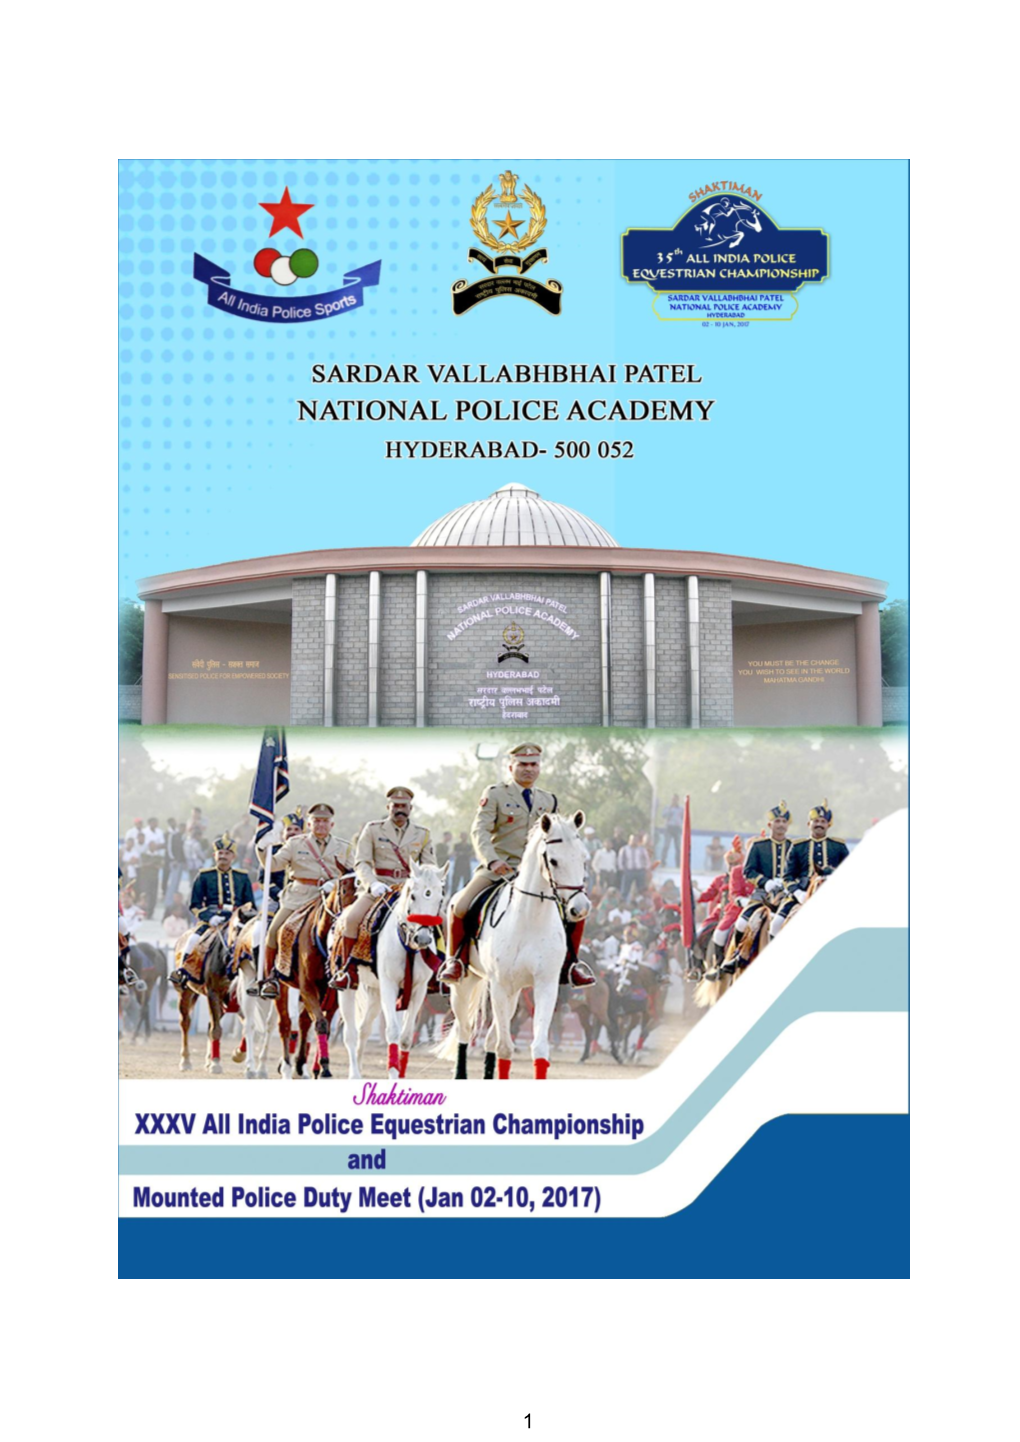 SHAKTIMAN 35Th All India Police Equestrian Championship & Mounted Police Duty Meet